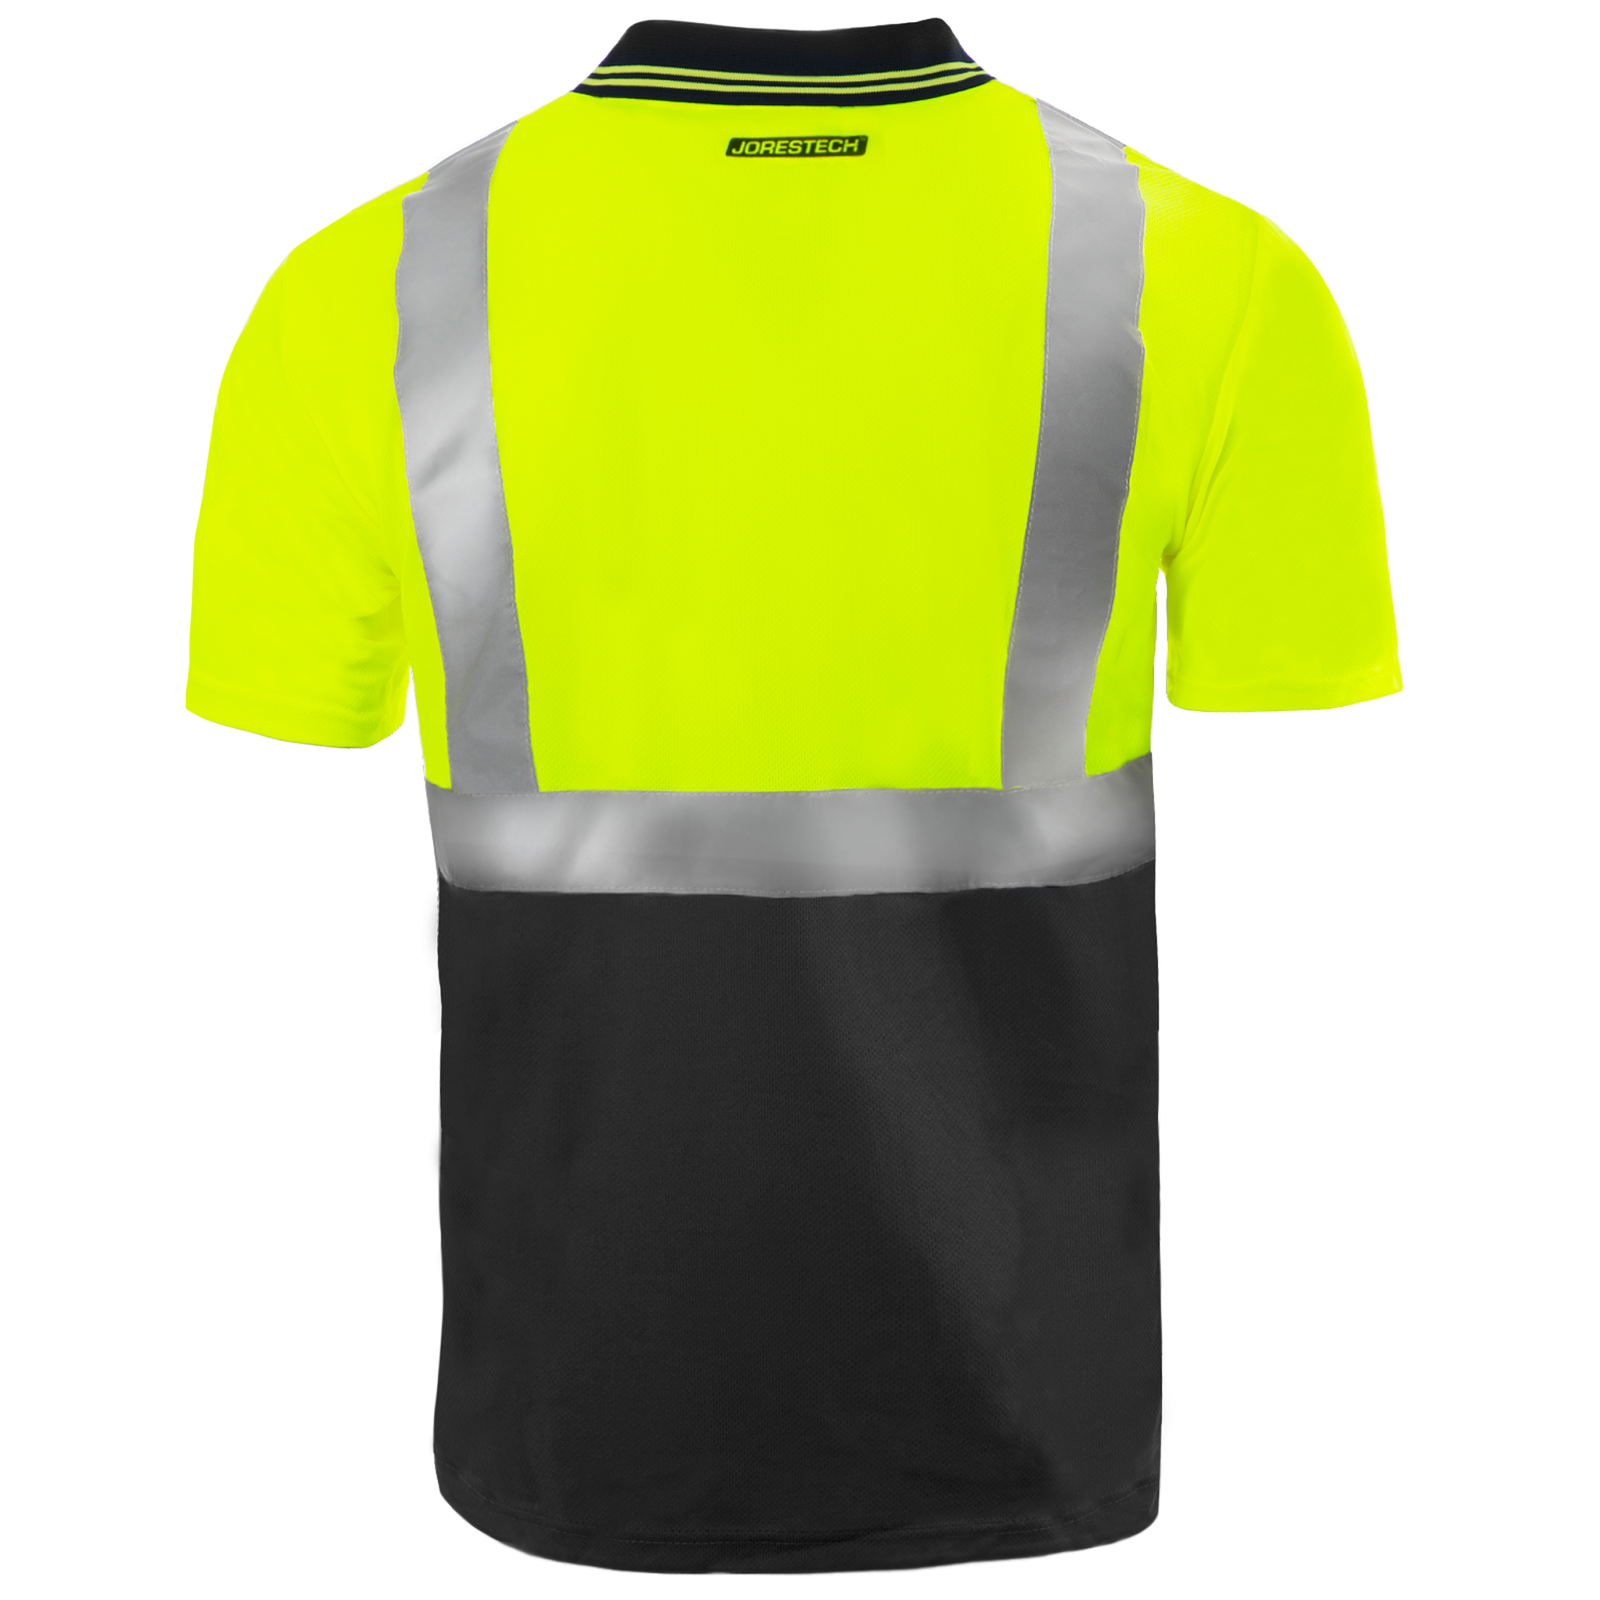 Back view of a Hi-vis yellow and black reflective safety polo shirt. The shirt is short sleeve, has a black collar and 2 buttons.